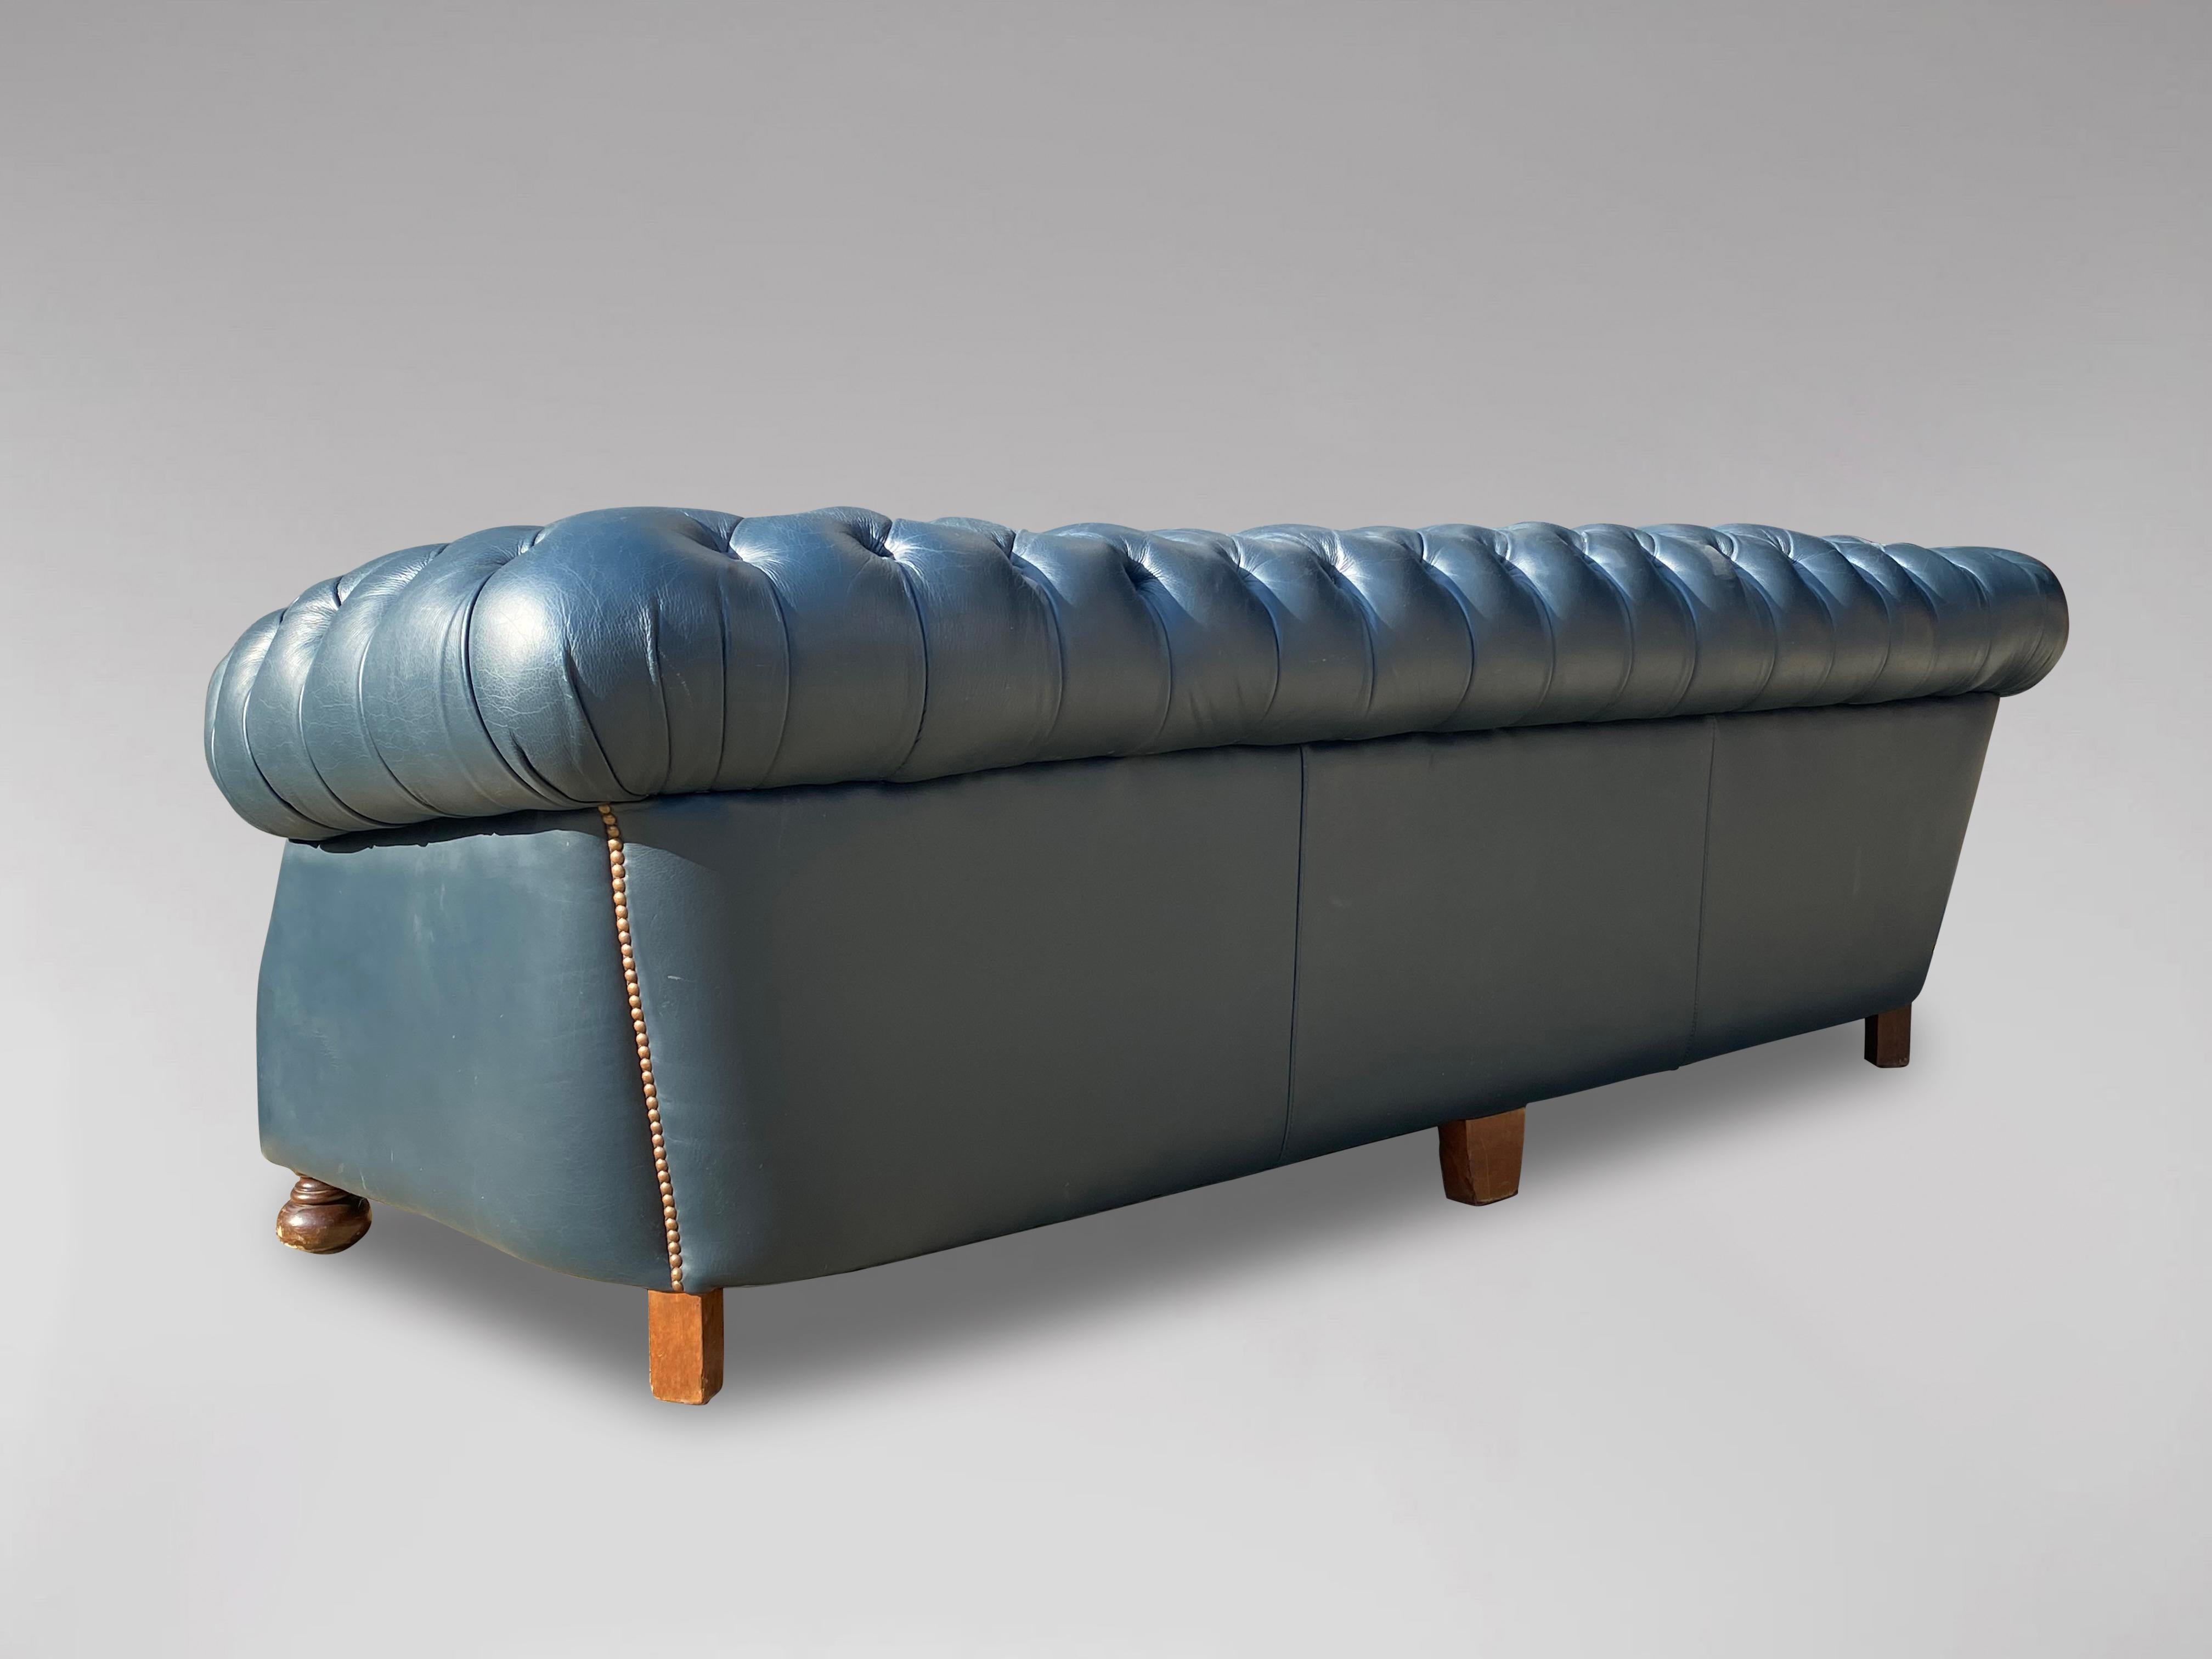 British 20th Century Stunning Quality Blue Leather 3 Seater Chesterfield Sofa